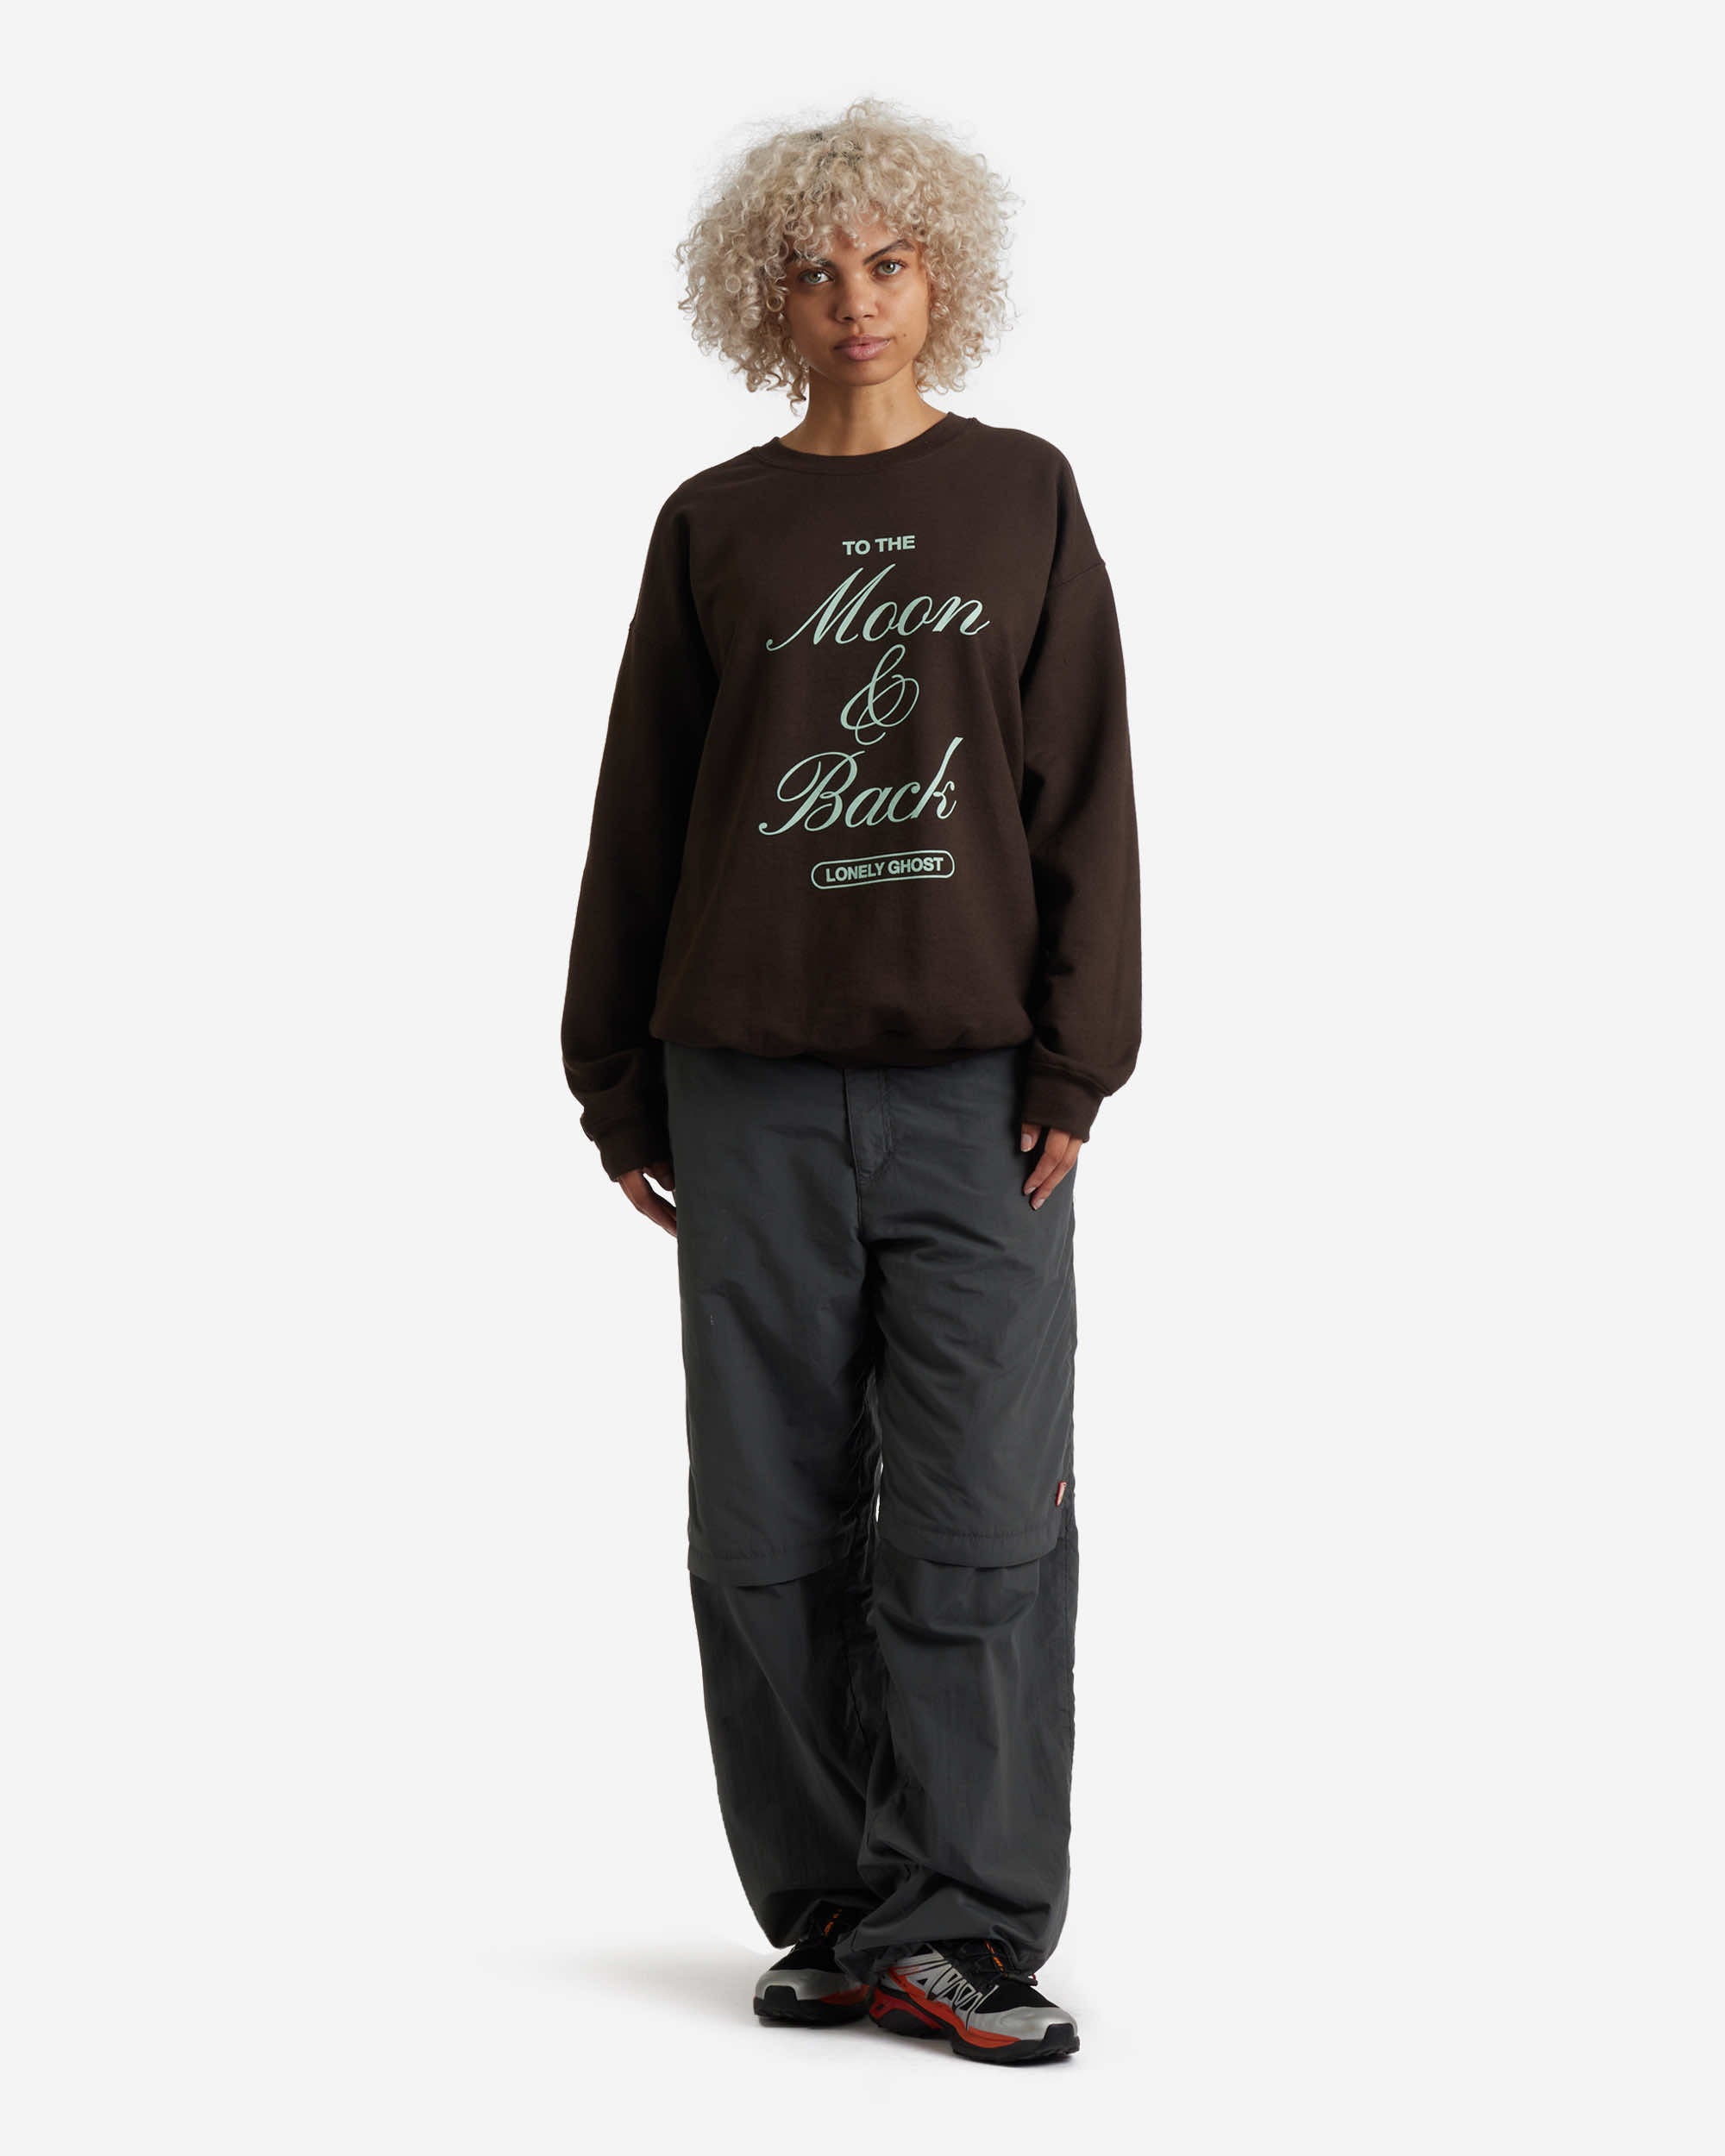 To the Moon and Back Crewneck Sweater